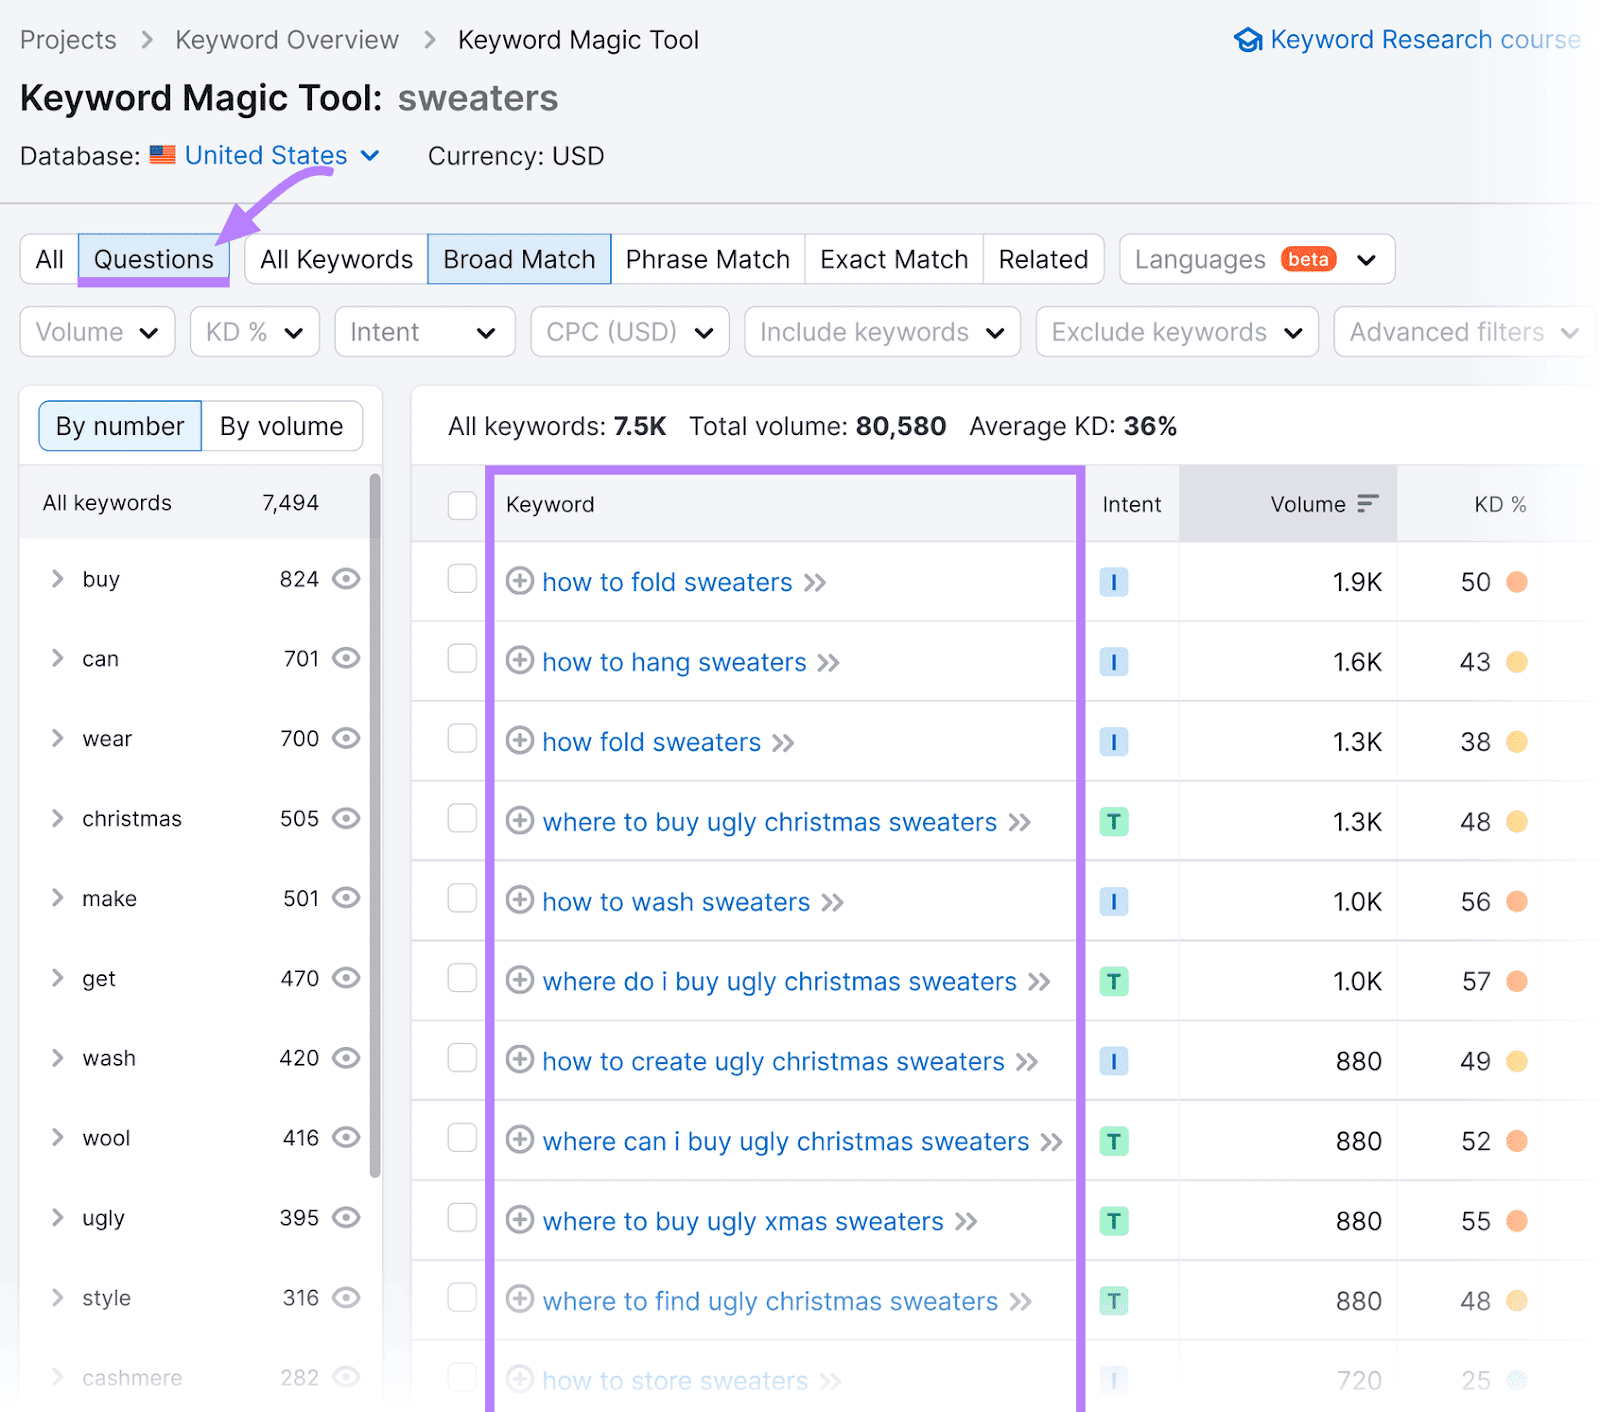 "Questions" keywords related to "sweaters" in Keyword Magic Tool